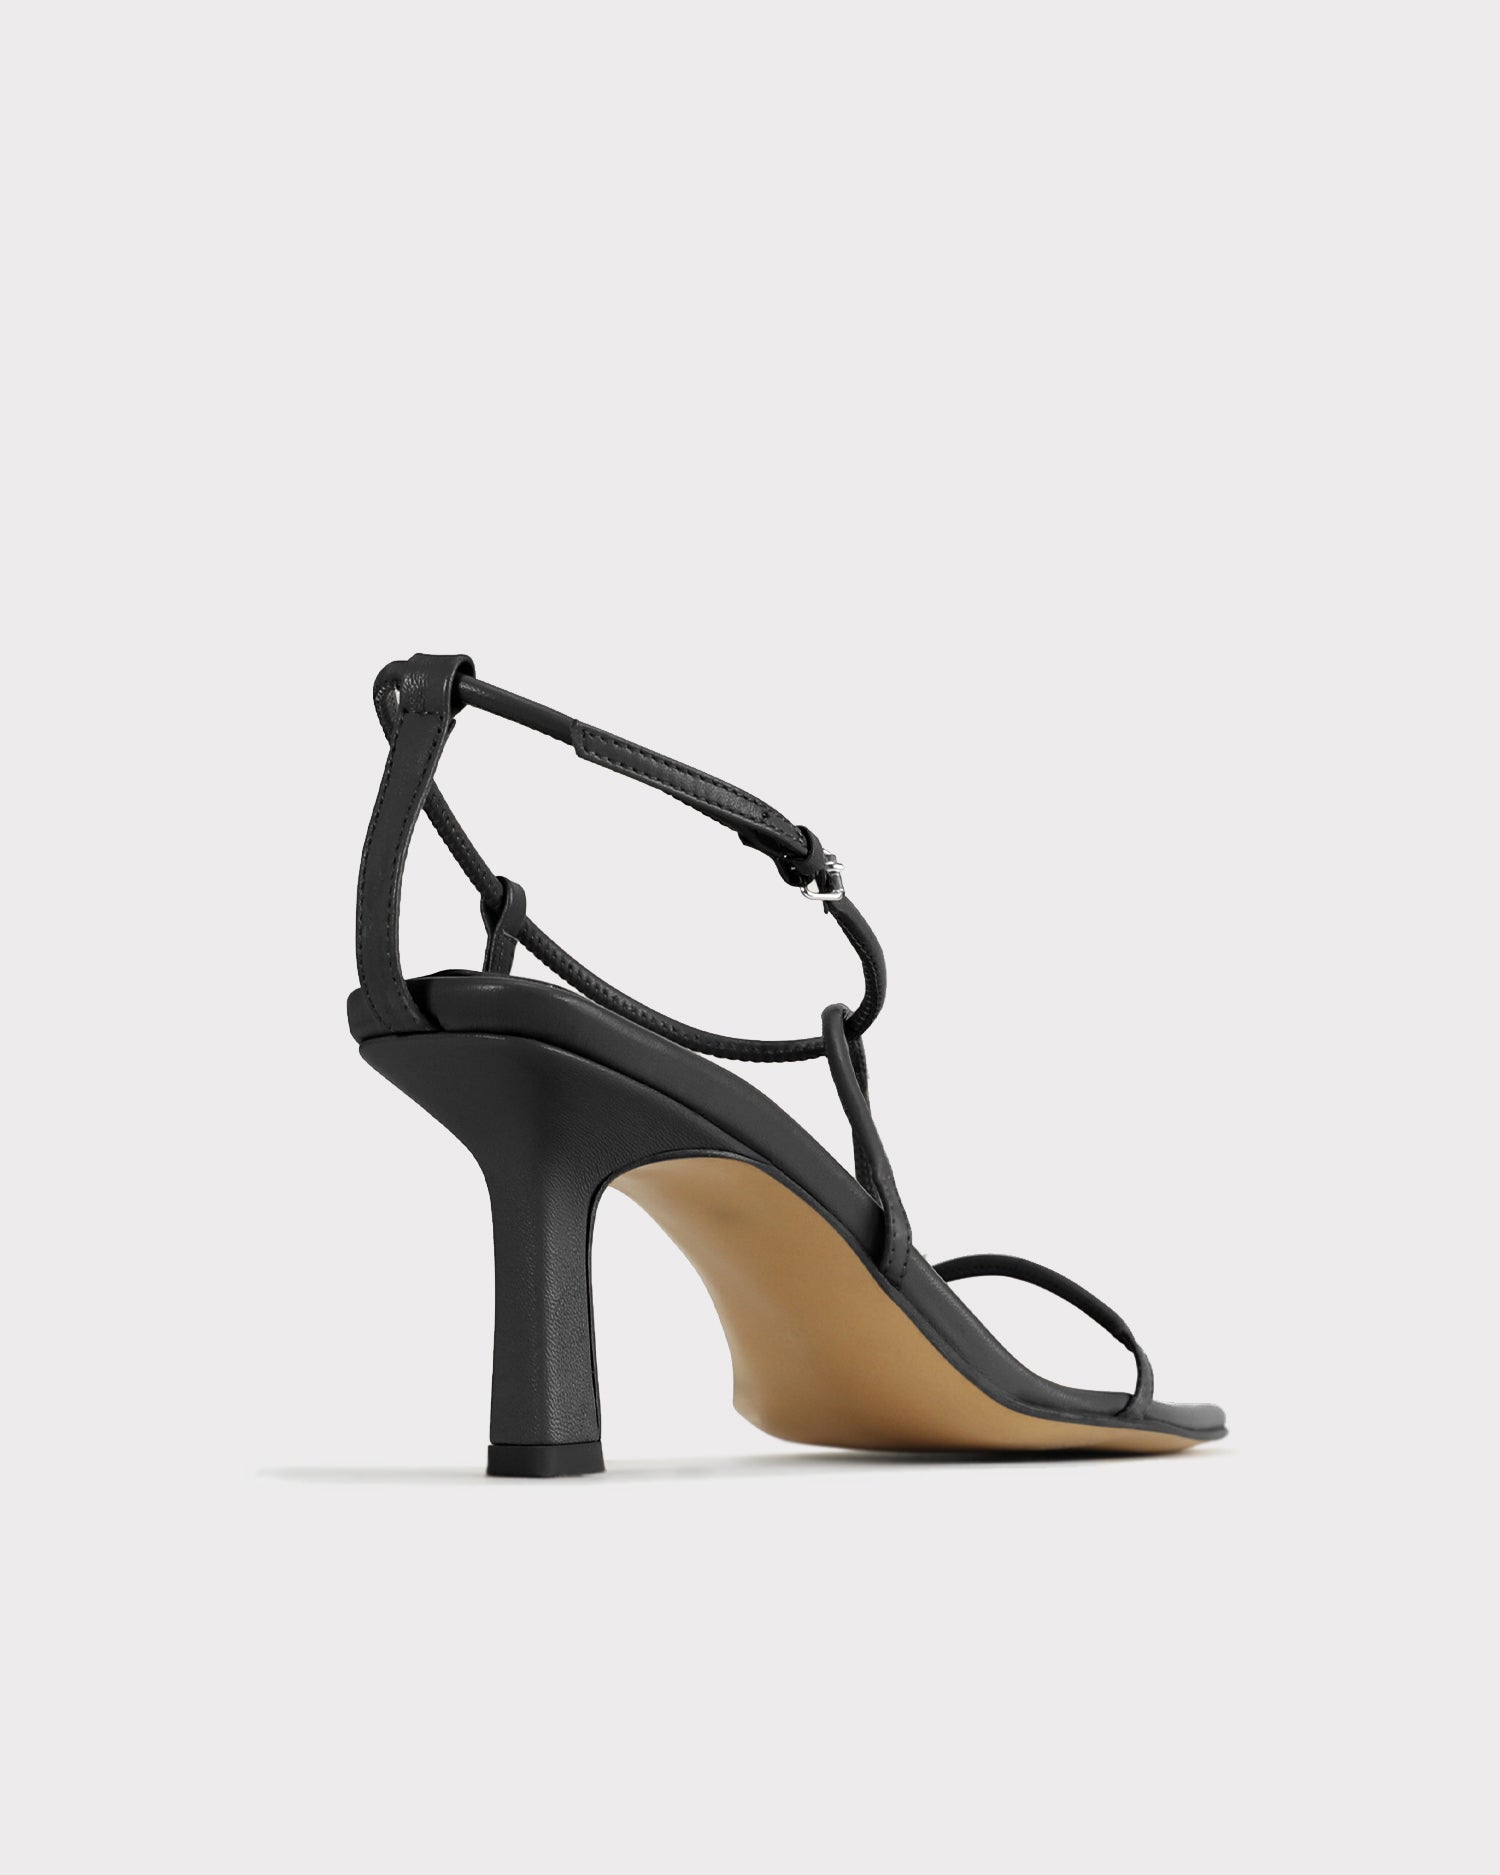 eco chic black strappy evening sandal with heel